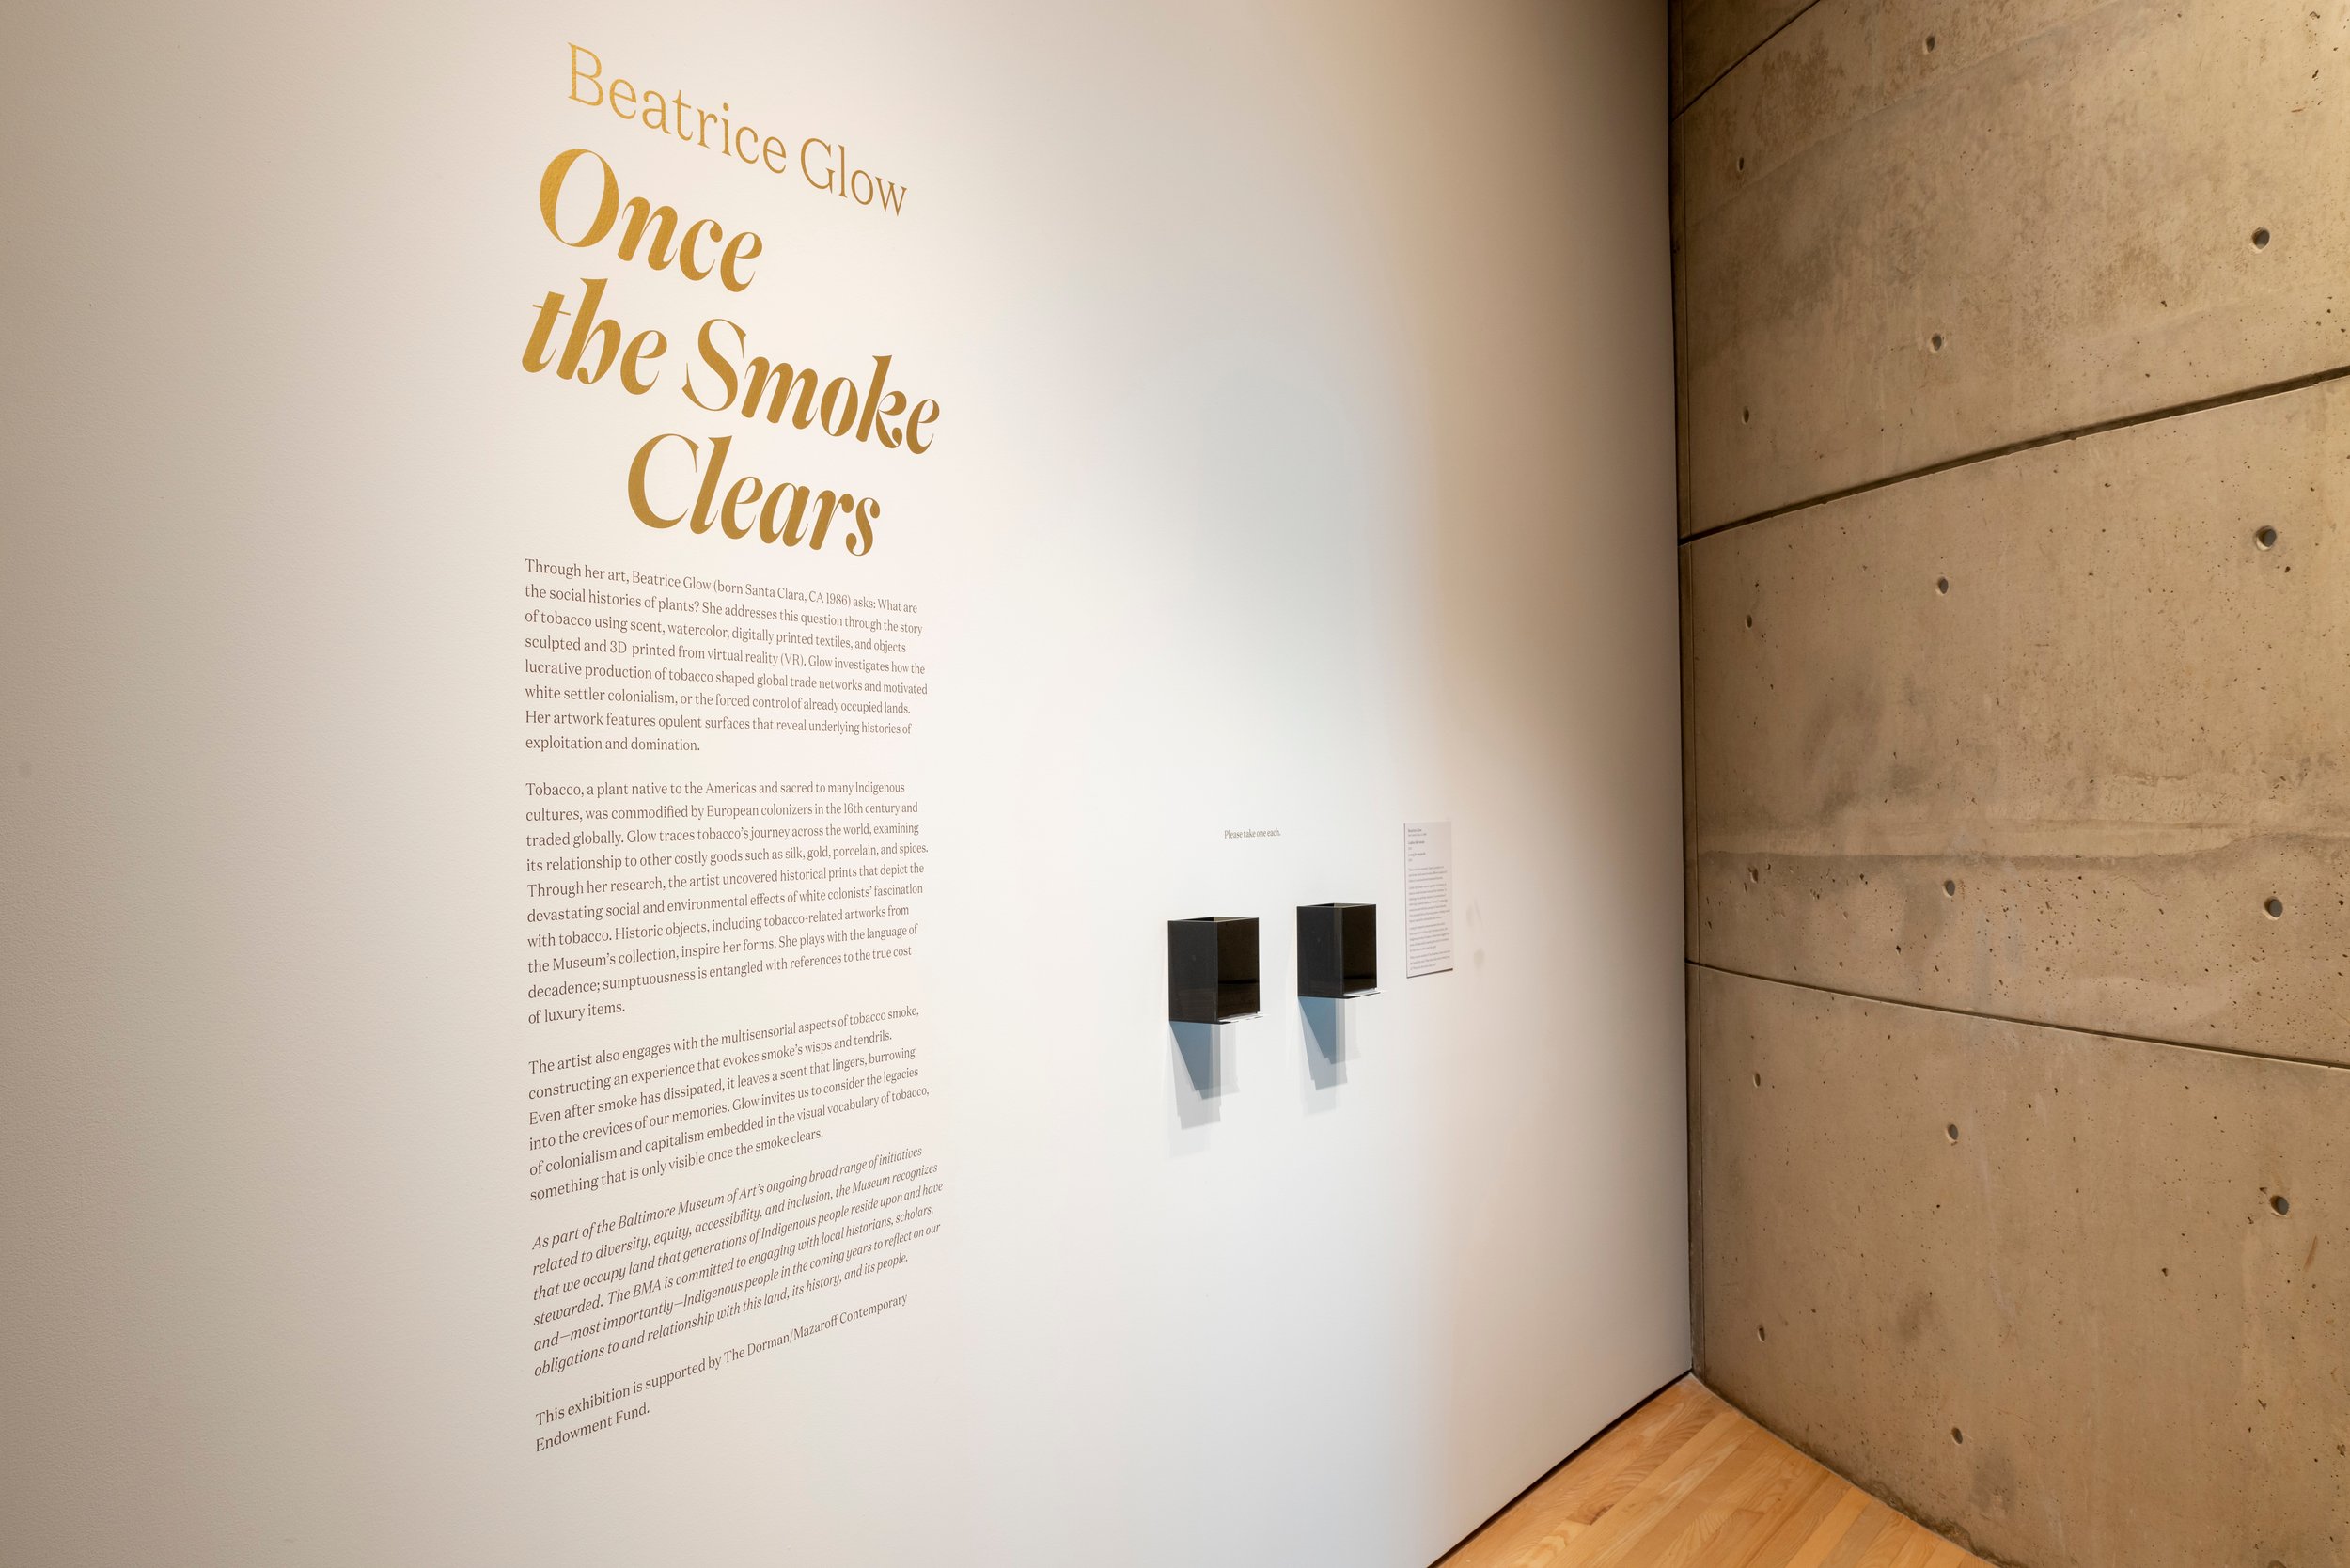 Beatrice Glow: Once the Smoke Clears, The Baltimore Museum of Art, May 15 – October 2, 2022, Photography by Mitro Hood.